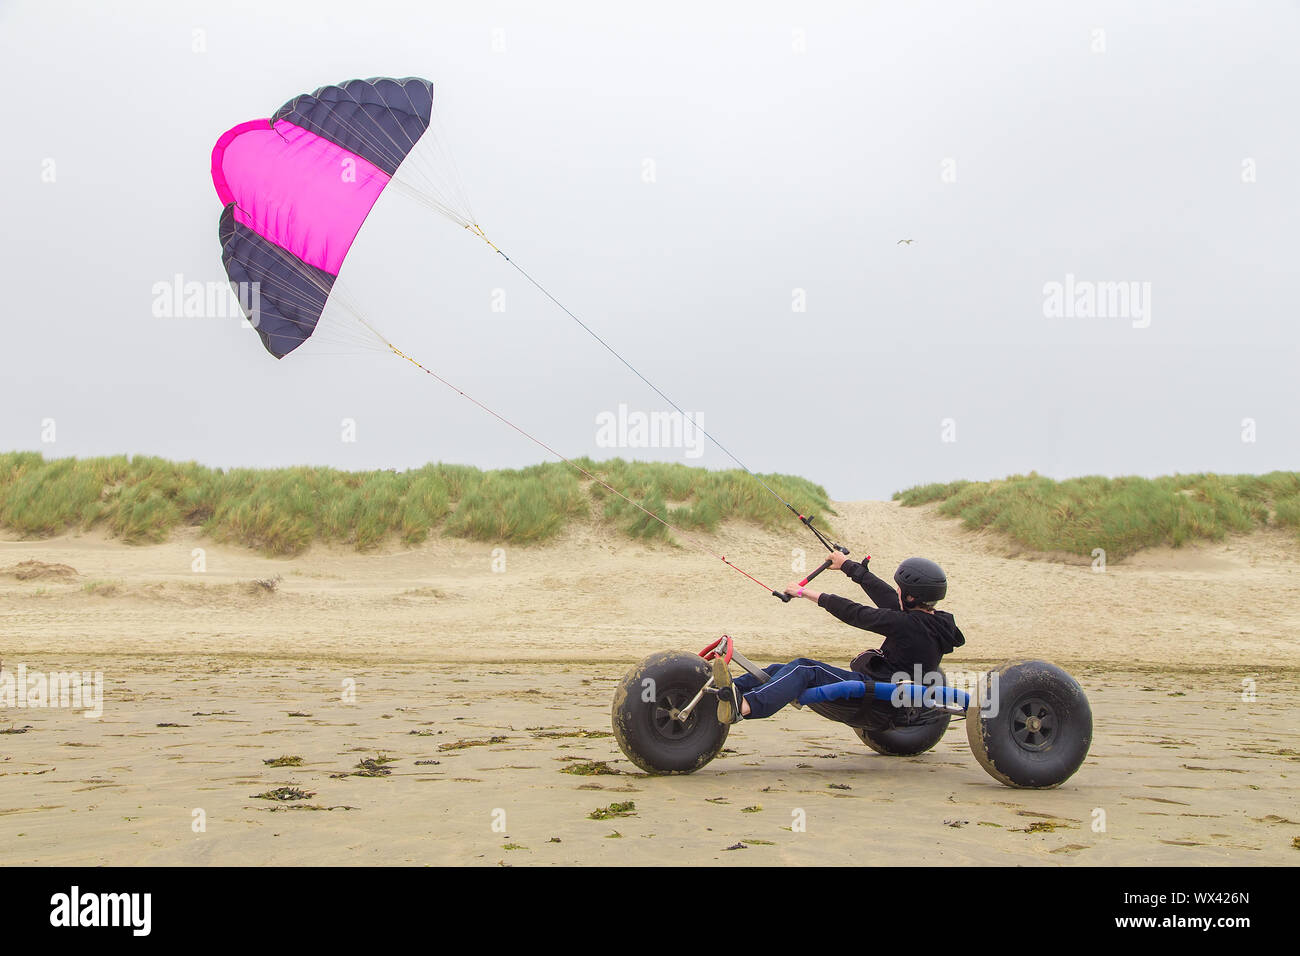 Teenage boy durs avec buggy kite on beach Banque D'Images